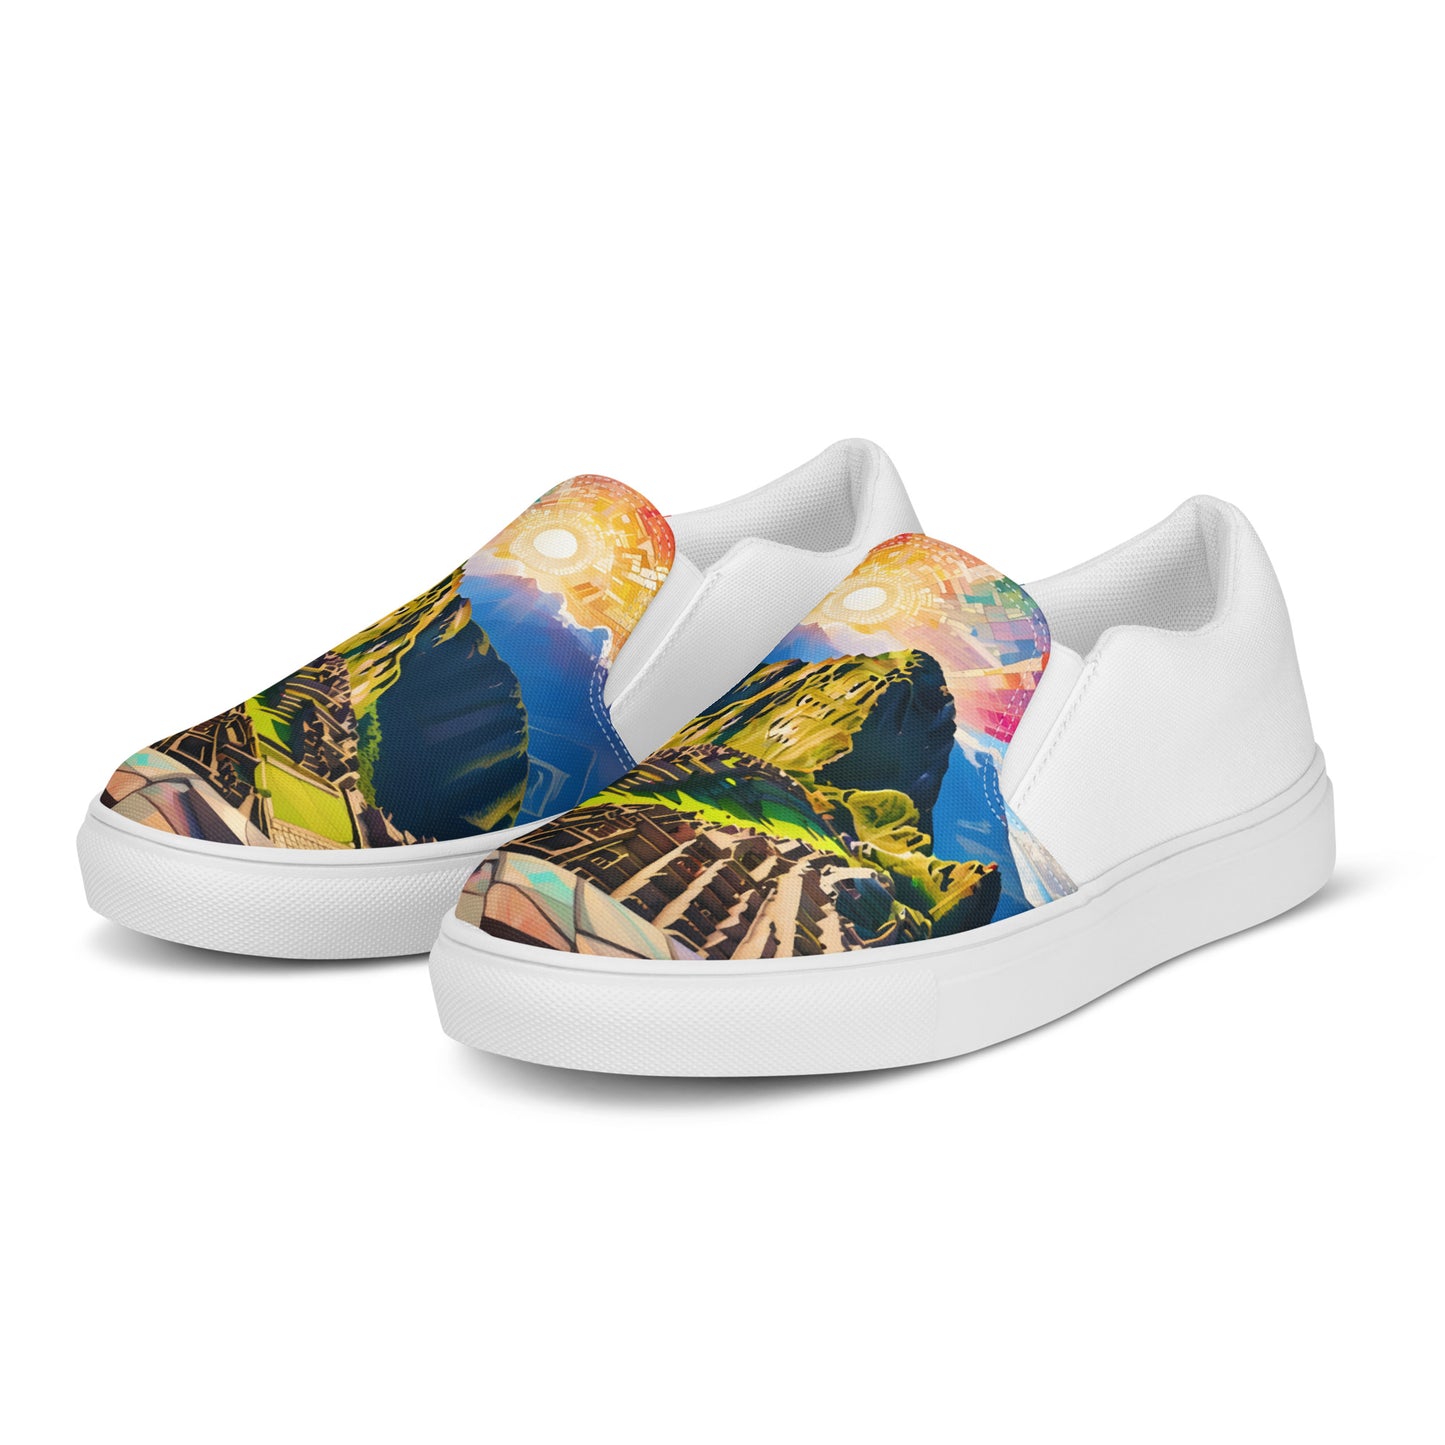 Machu Picchu - Stained glass - Women - White Slip-on shoes